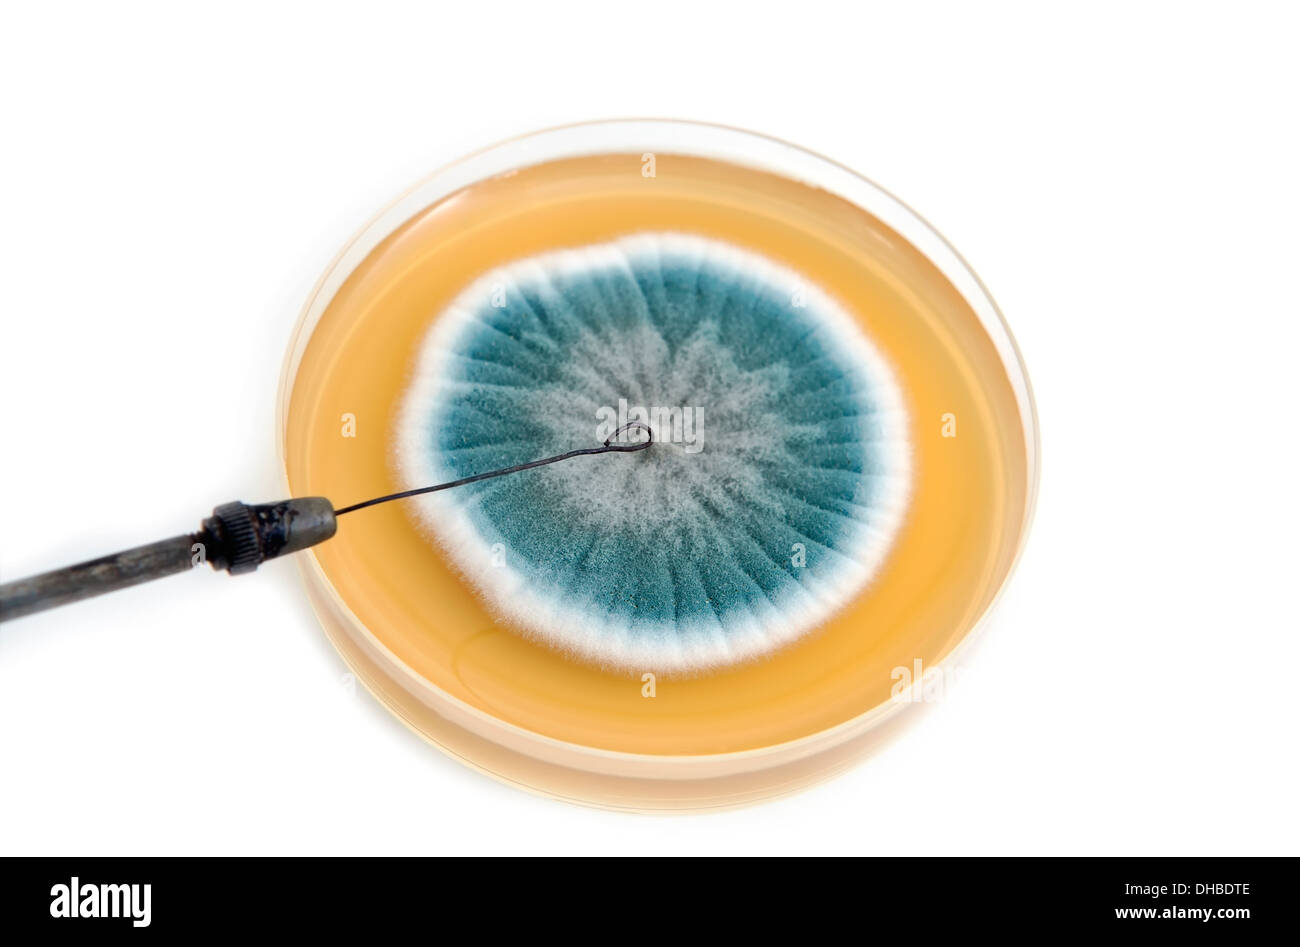 metal laboratory loop and fungi on agar plate over white background Stock Photo